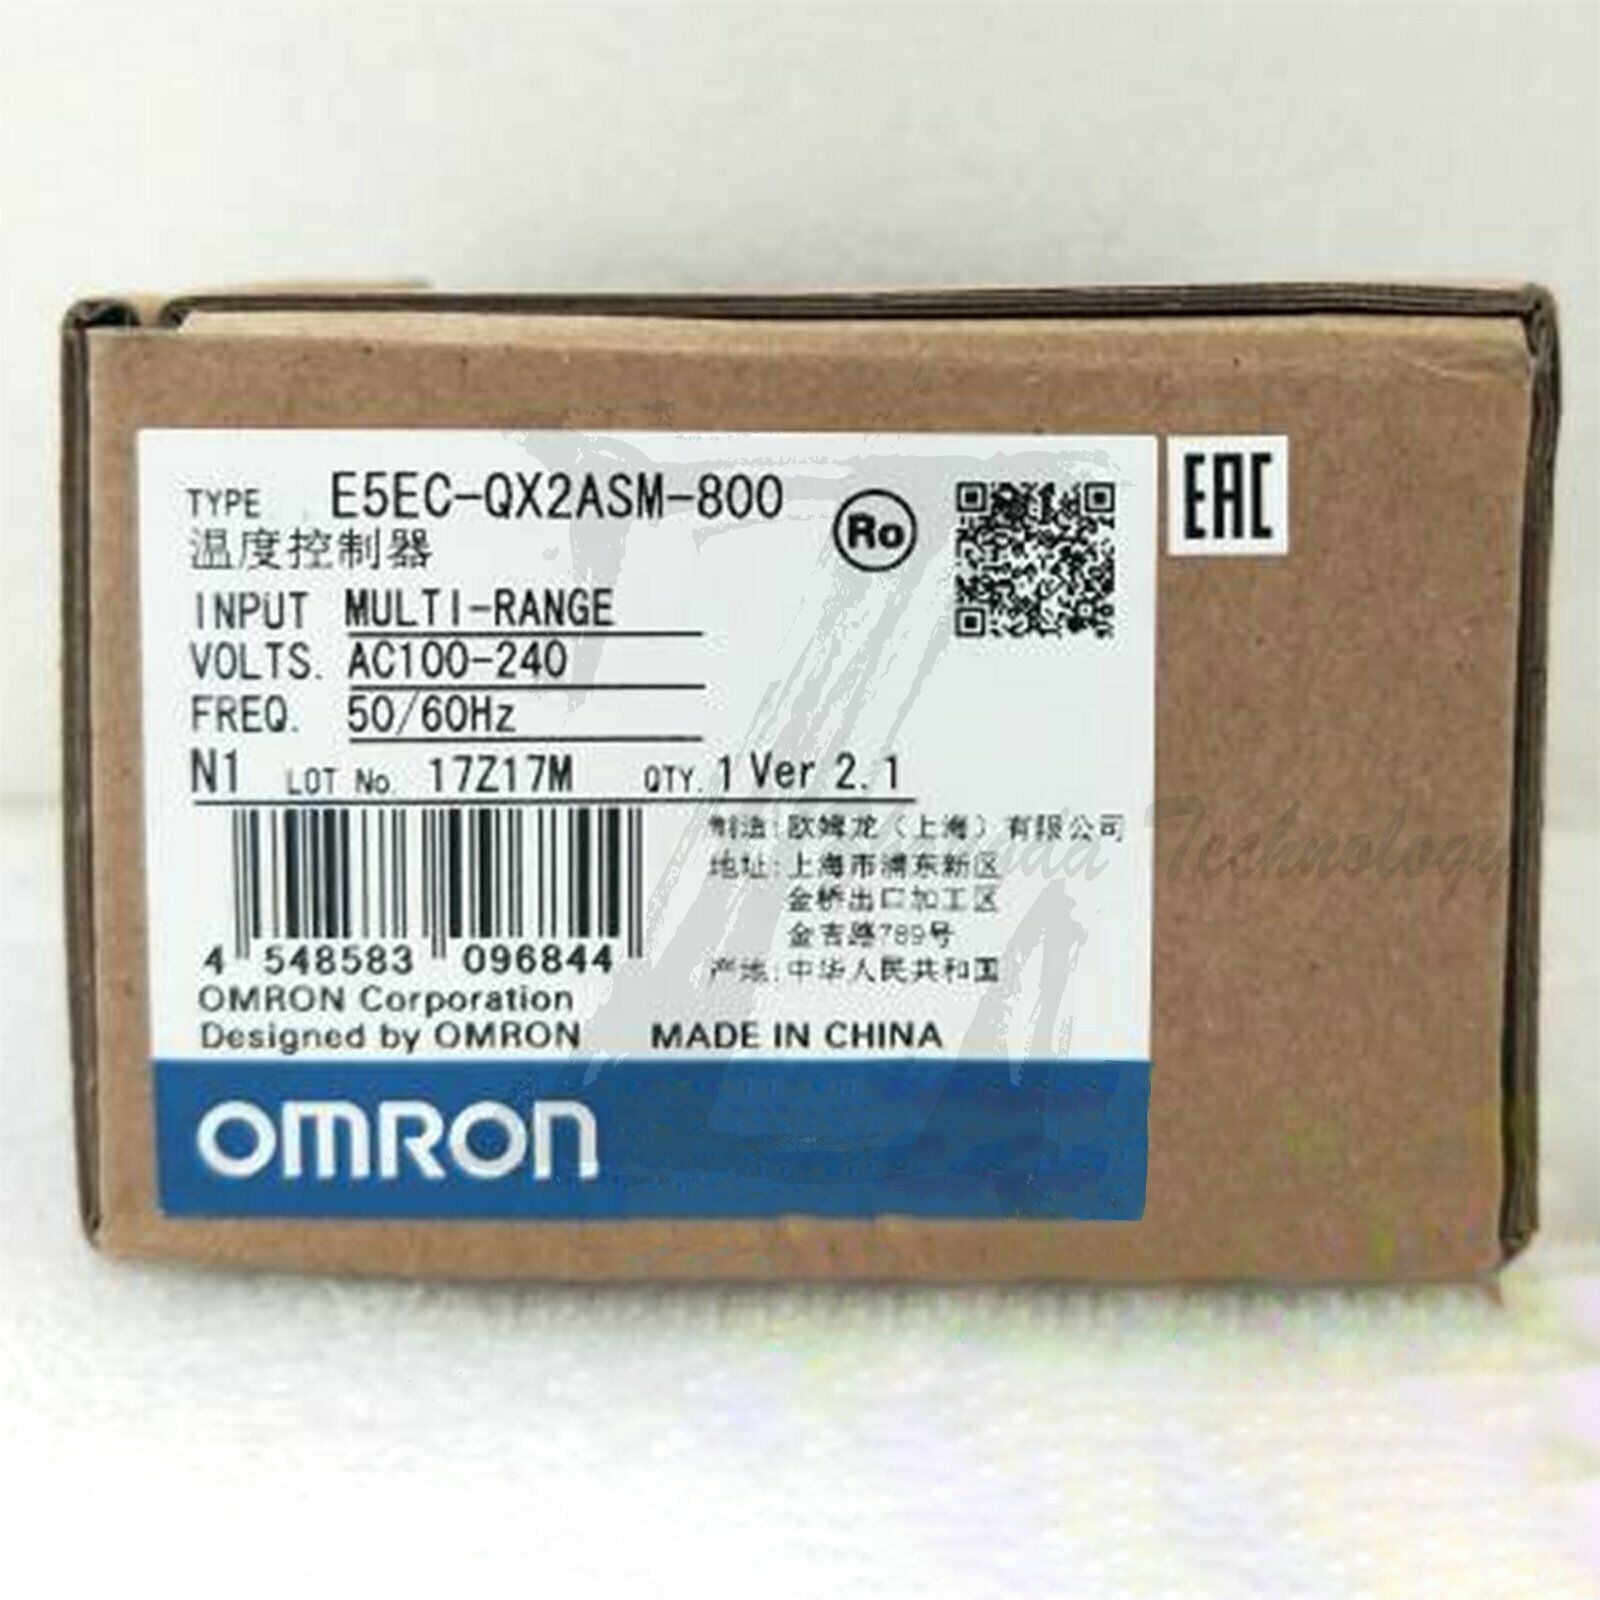 1pc new Omron thermostat E5EC-QX2ASM-800 one year warranty KOEED 1, 80%, import_2020_10_10_031751, Omron, Other